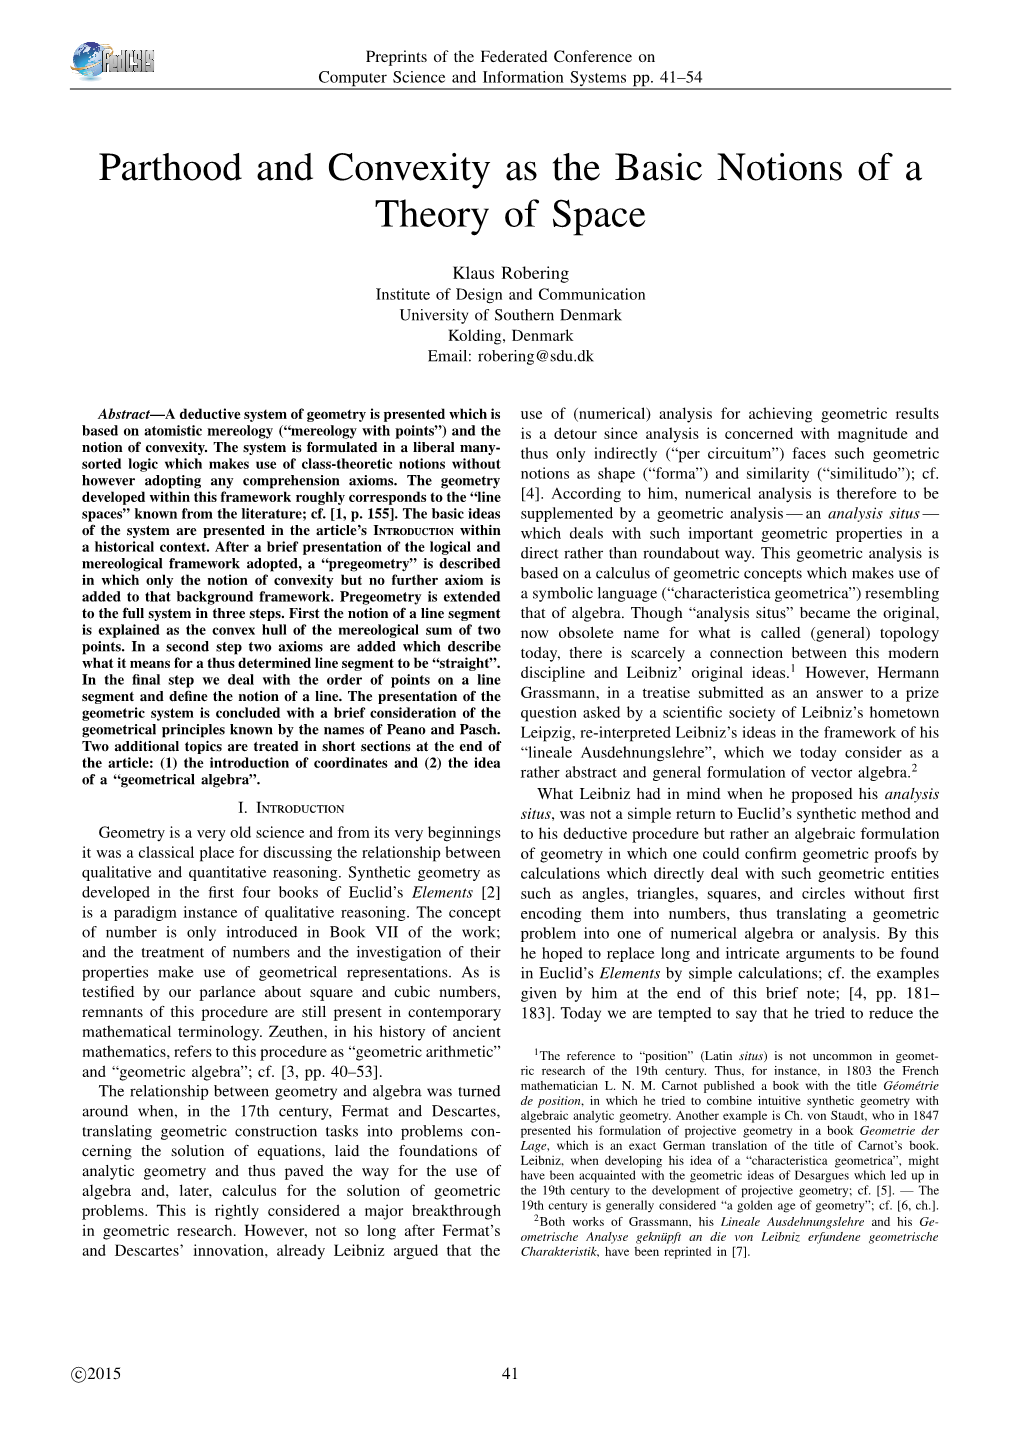 Parthood and Convexity As the Basic Notions of a Theory of Space